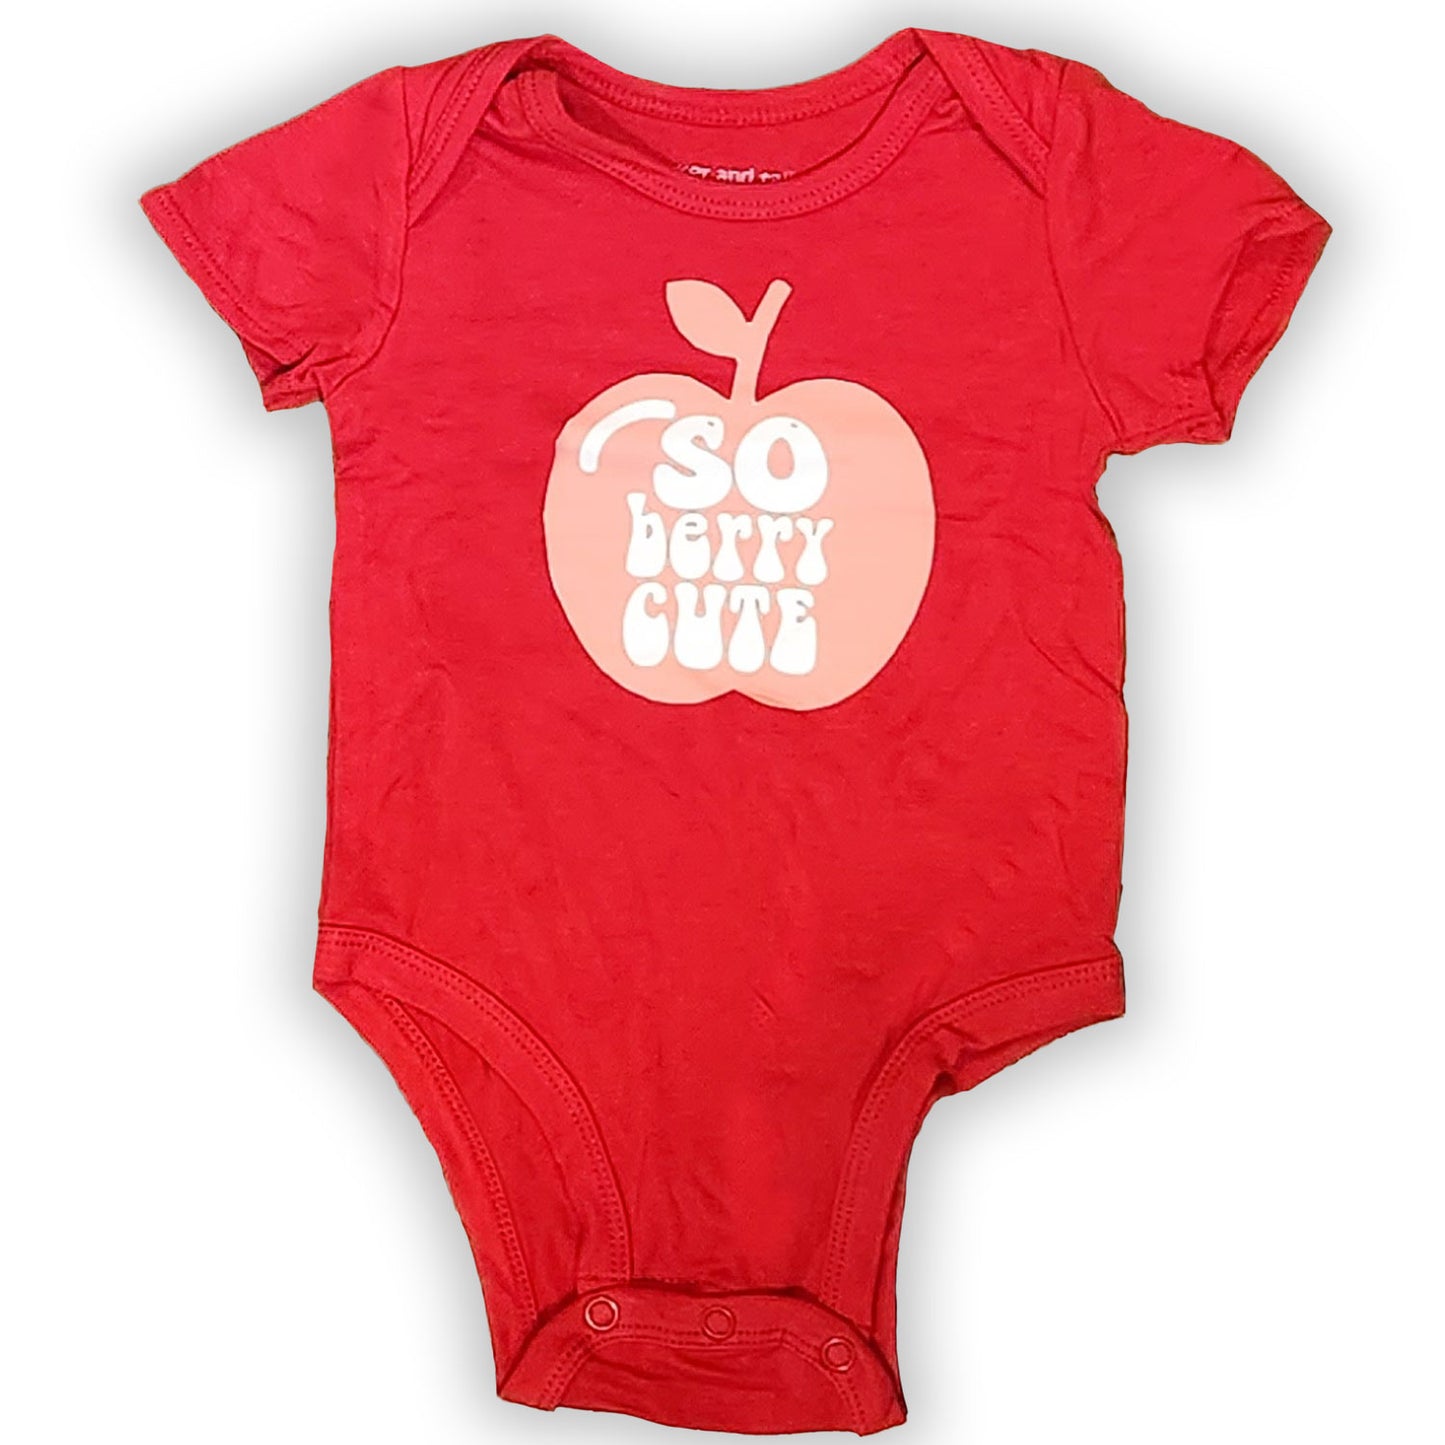 The Everyday Graphic Baby Onesie: So Berry Cute